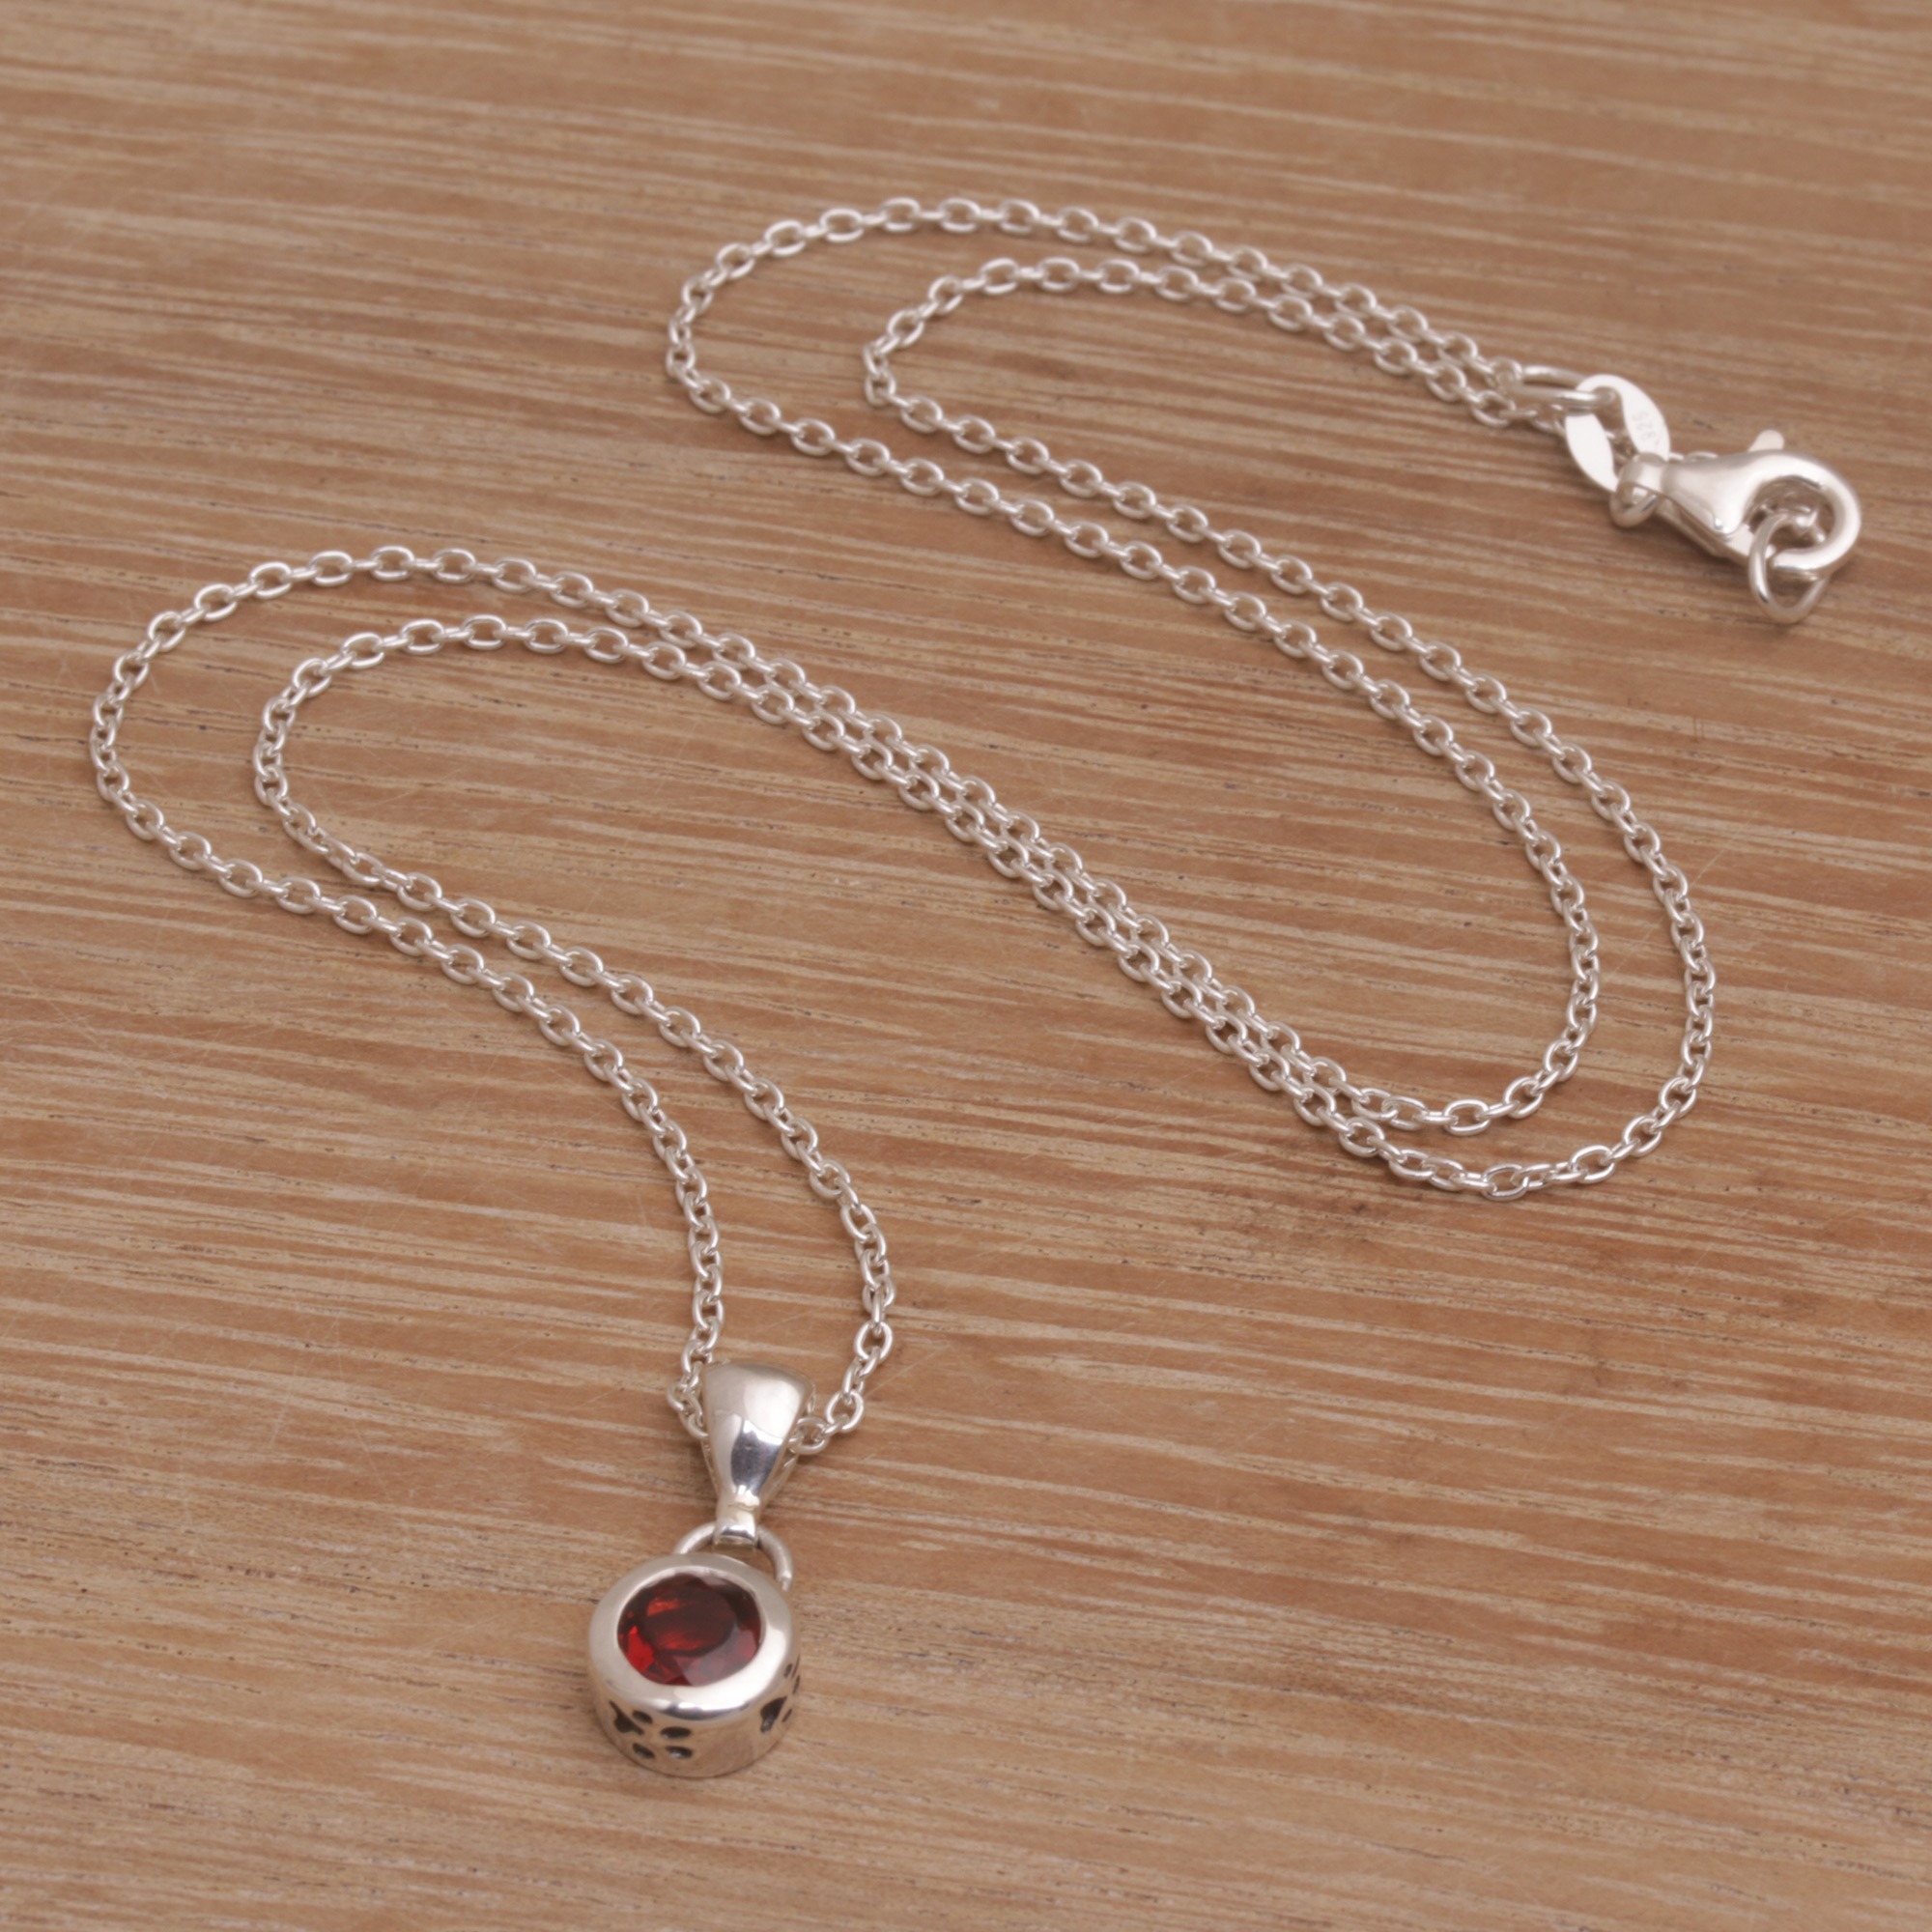 Garnet and Sterling Silver Pendant Necklace from Bali - Glowing Paws ...